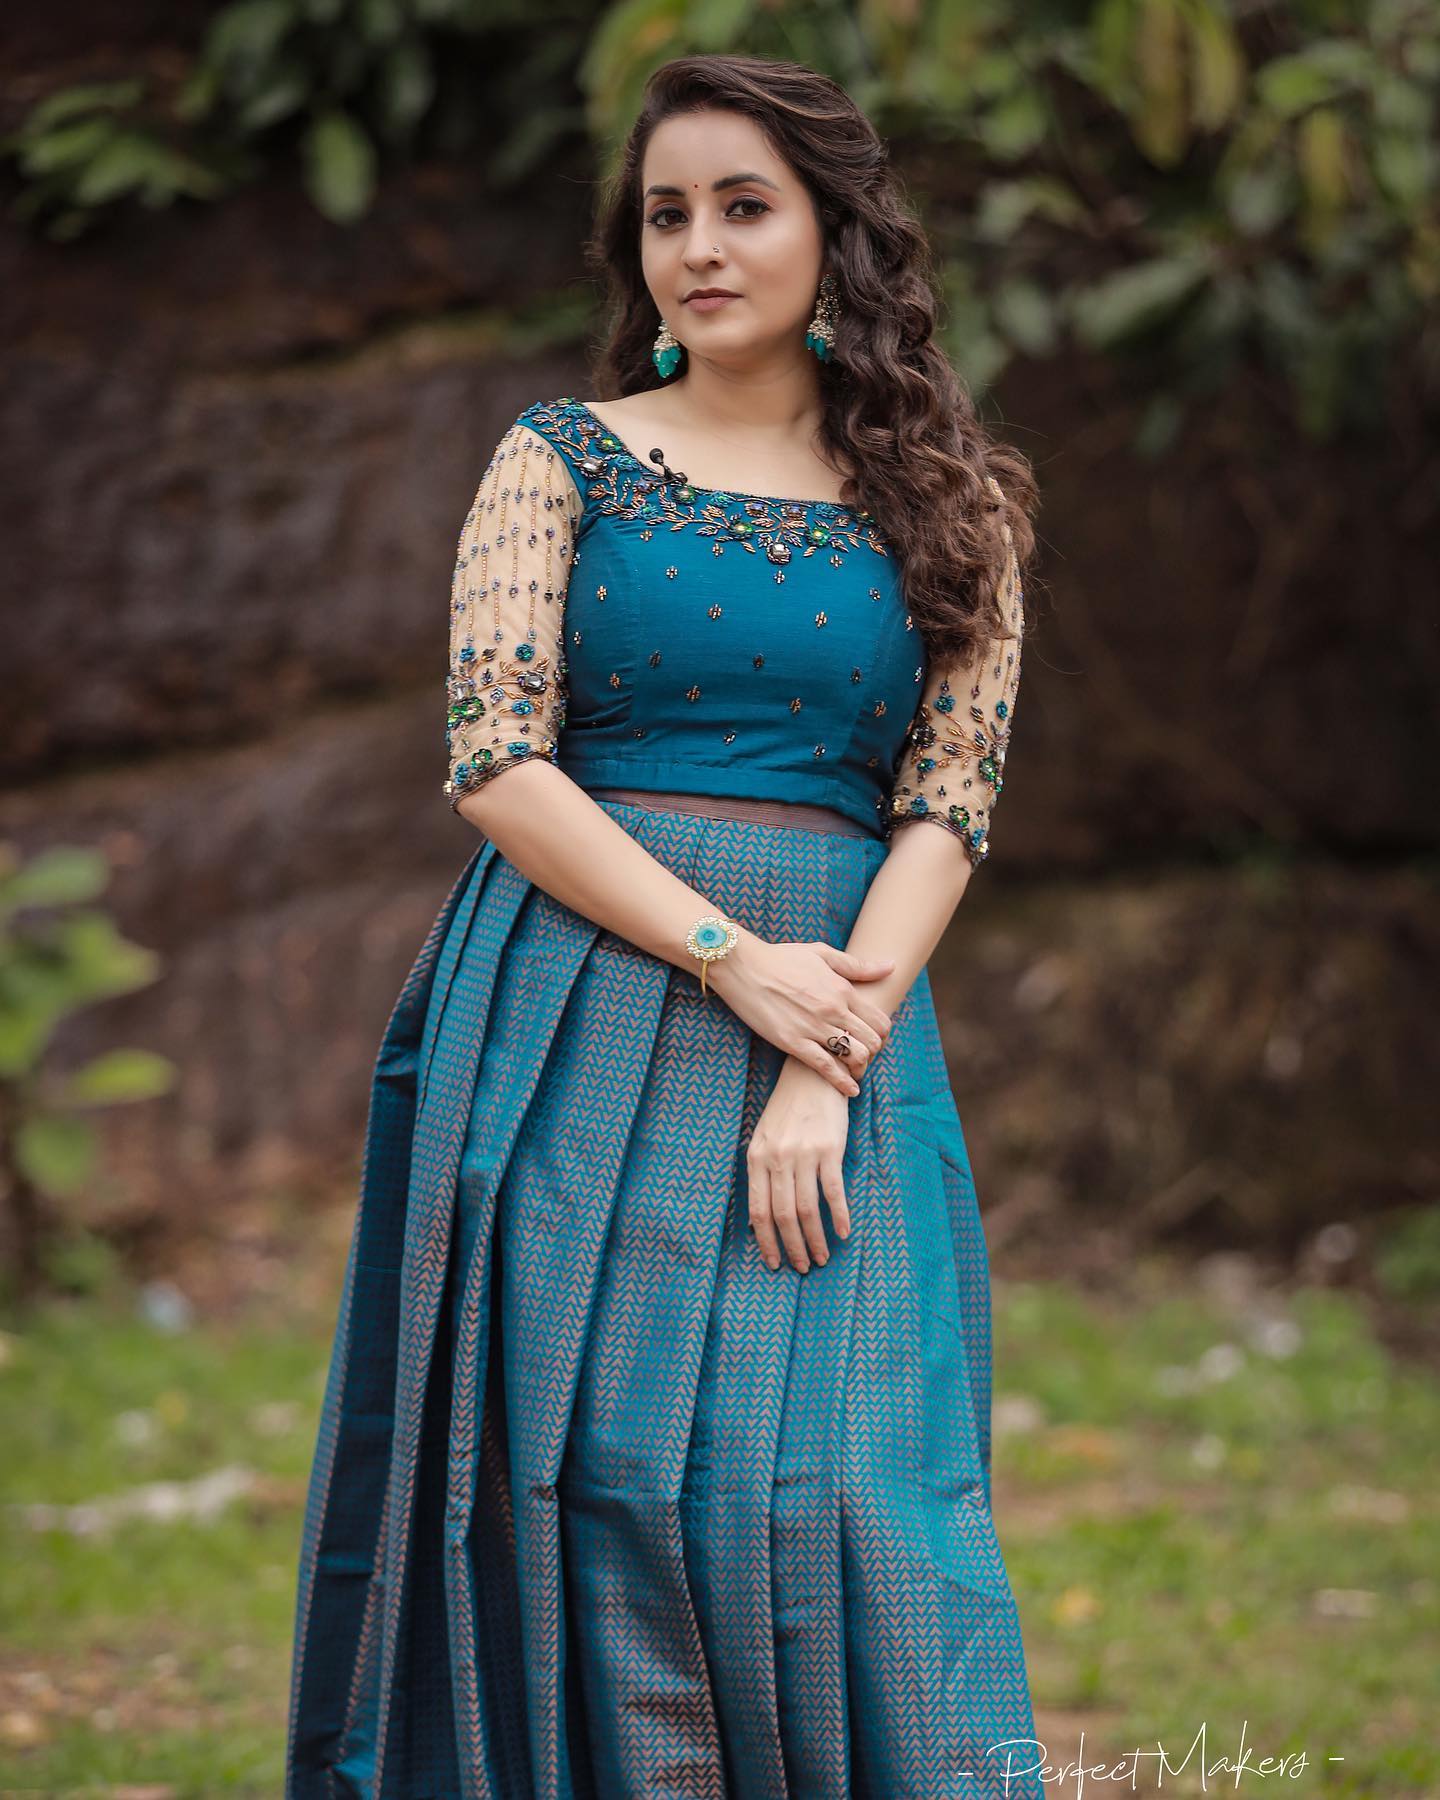 Bhama Photos, Pictures And Bhama HD Images - Kerala9.com